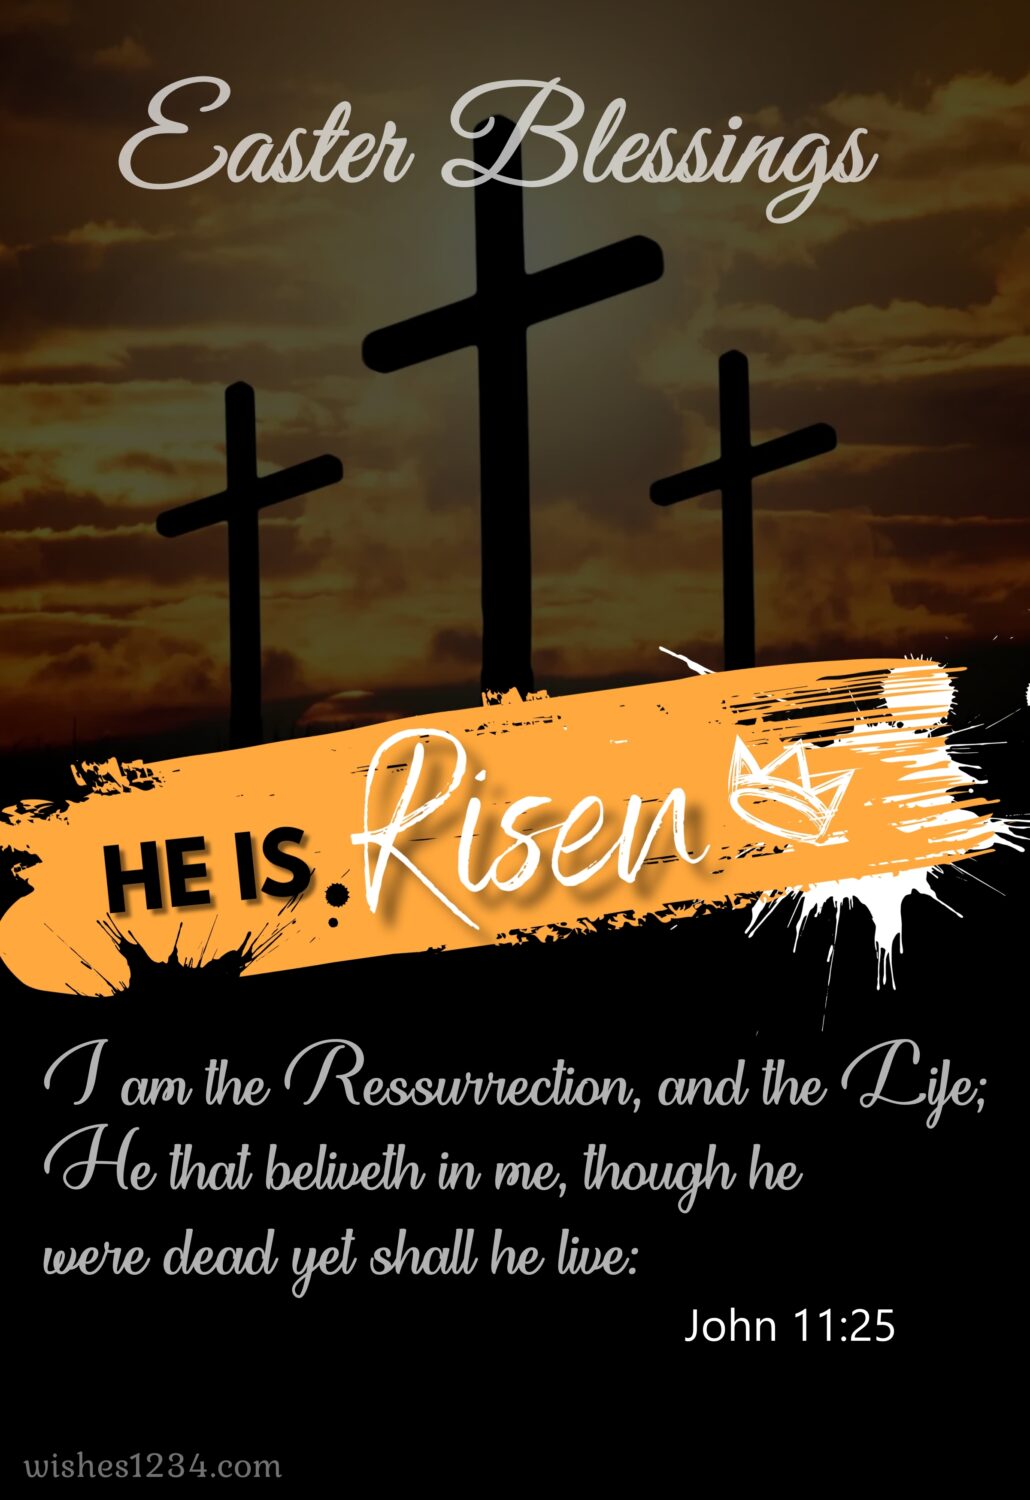 Three crosses with Easter blessings, Happy Easter Wishes, Quotes & Images.